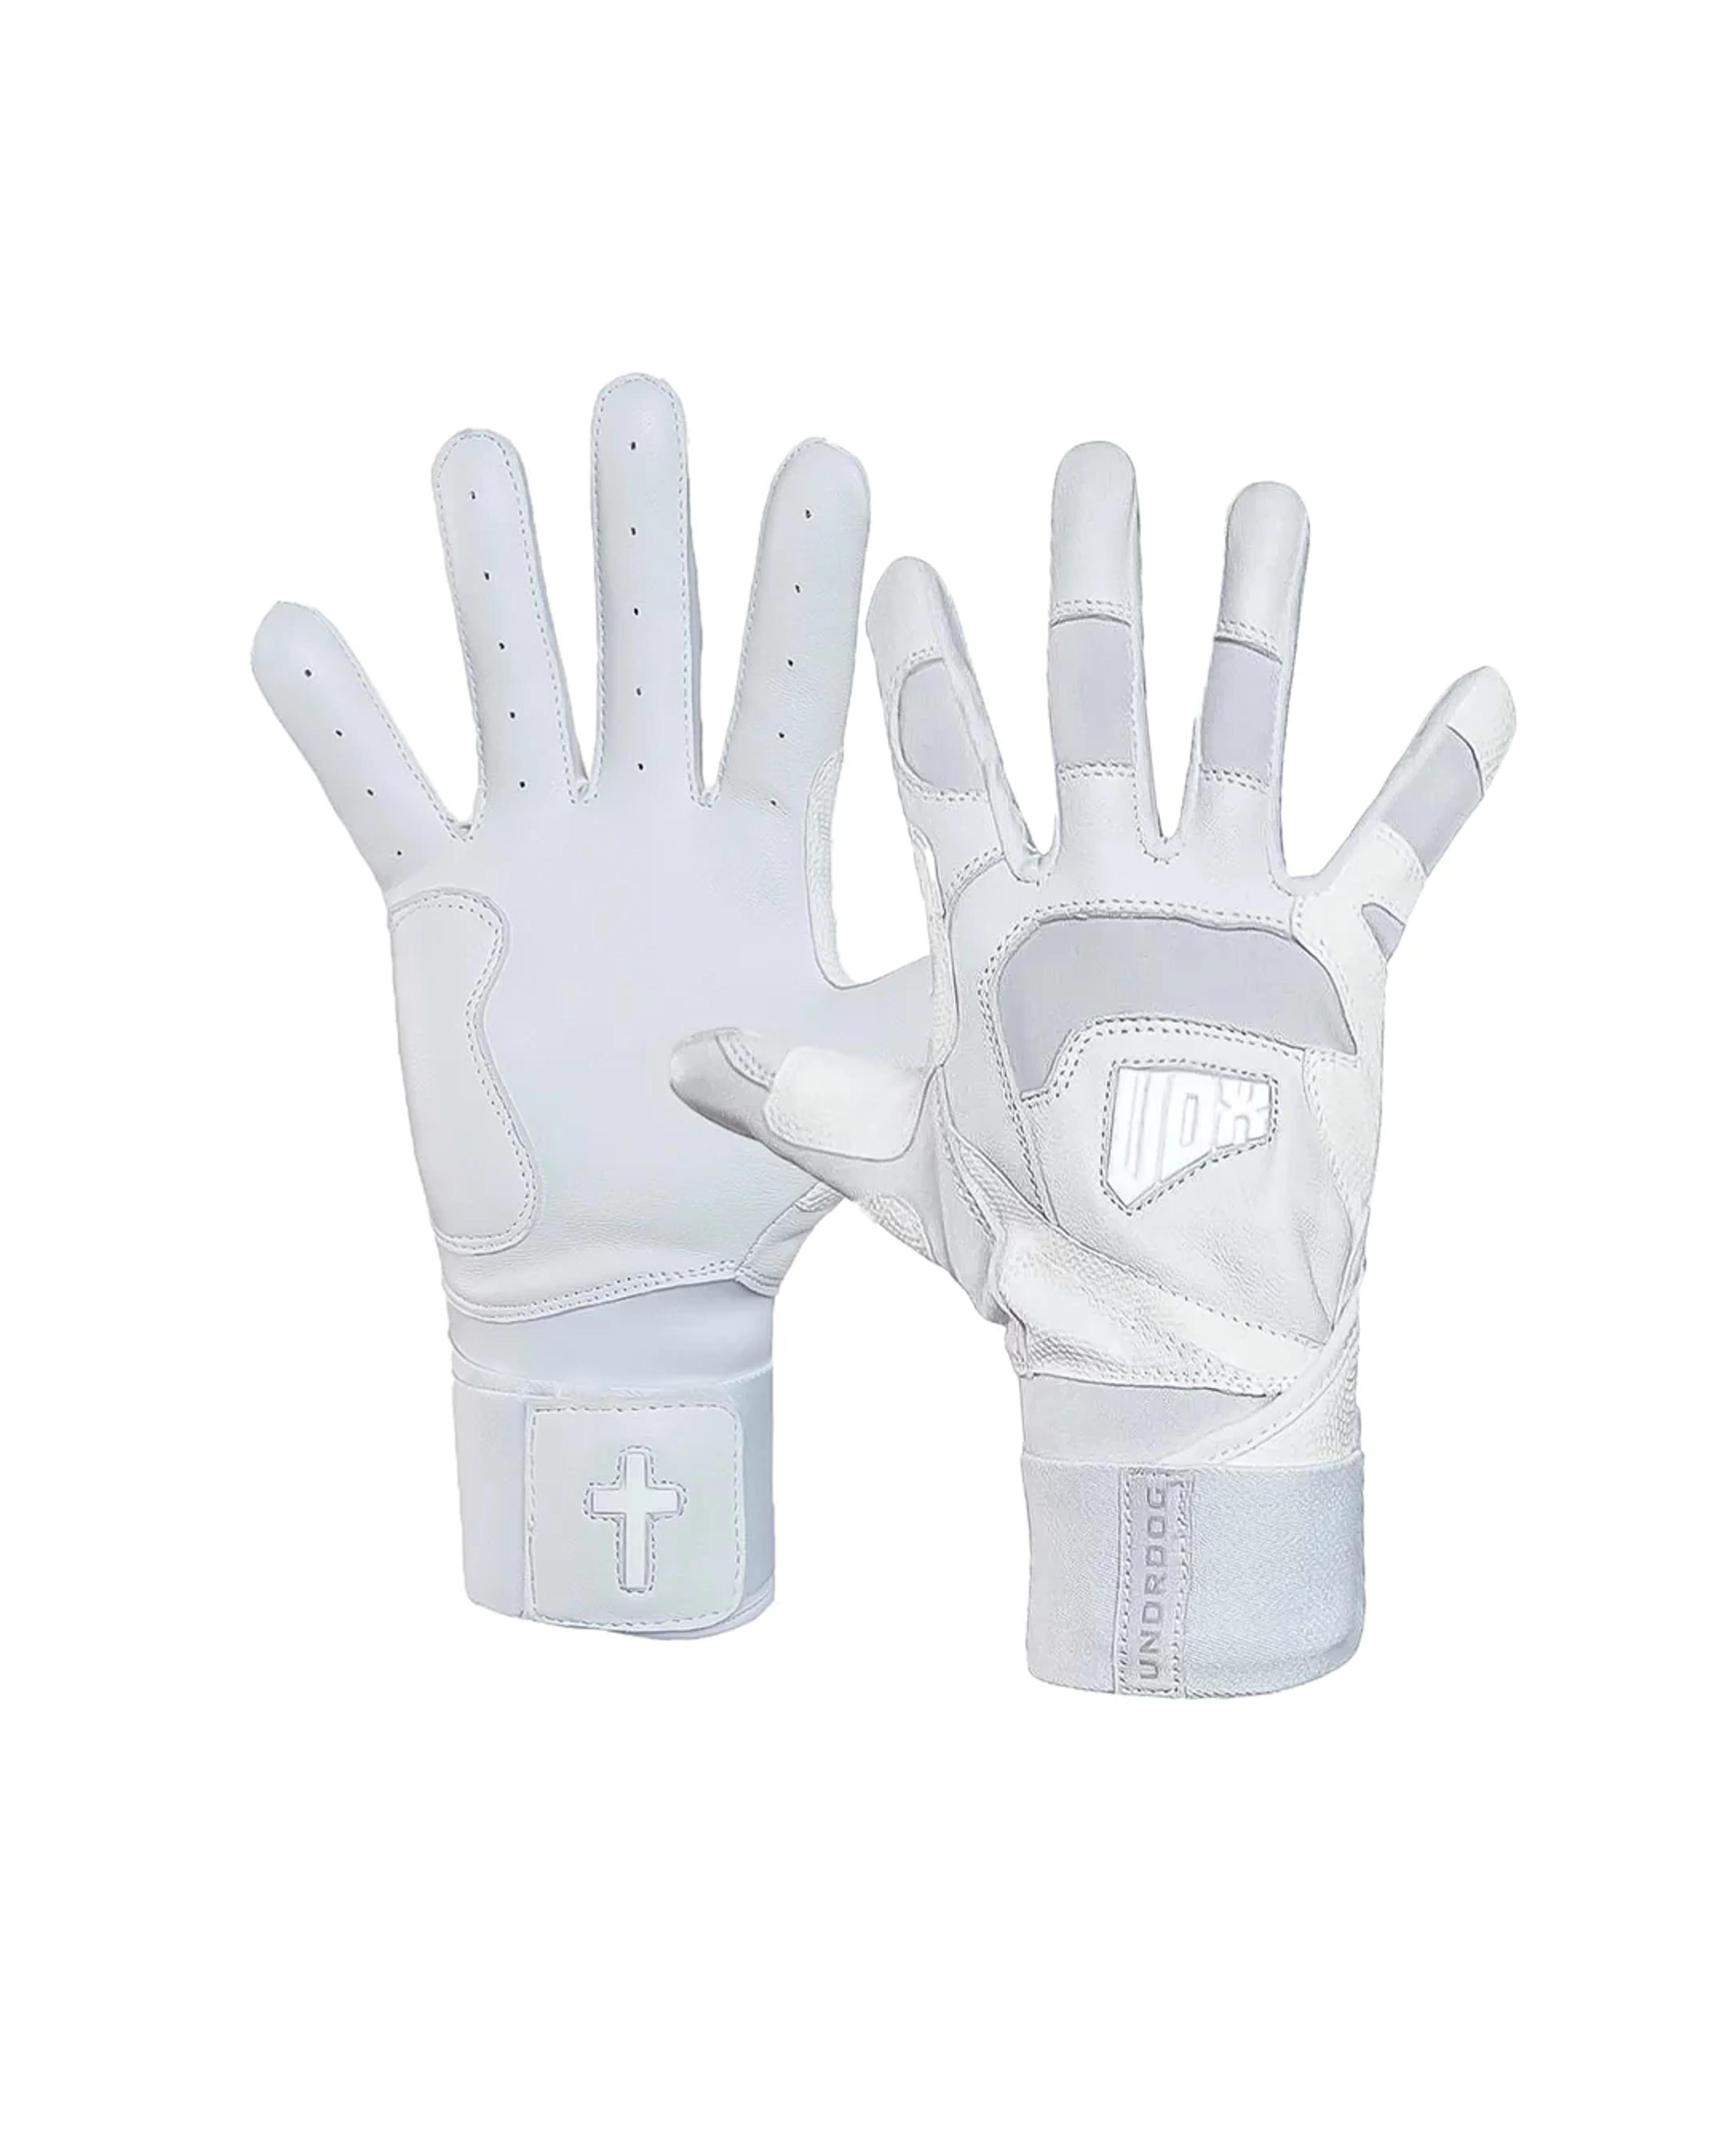 "FEARLESS" BATTING GLOVE - ADULT X-LARGE